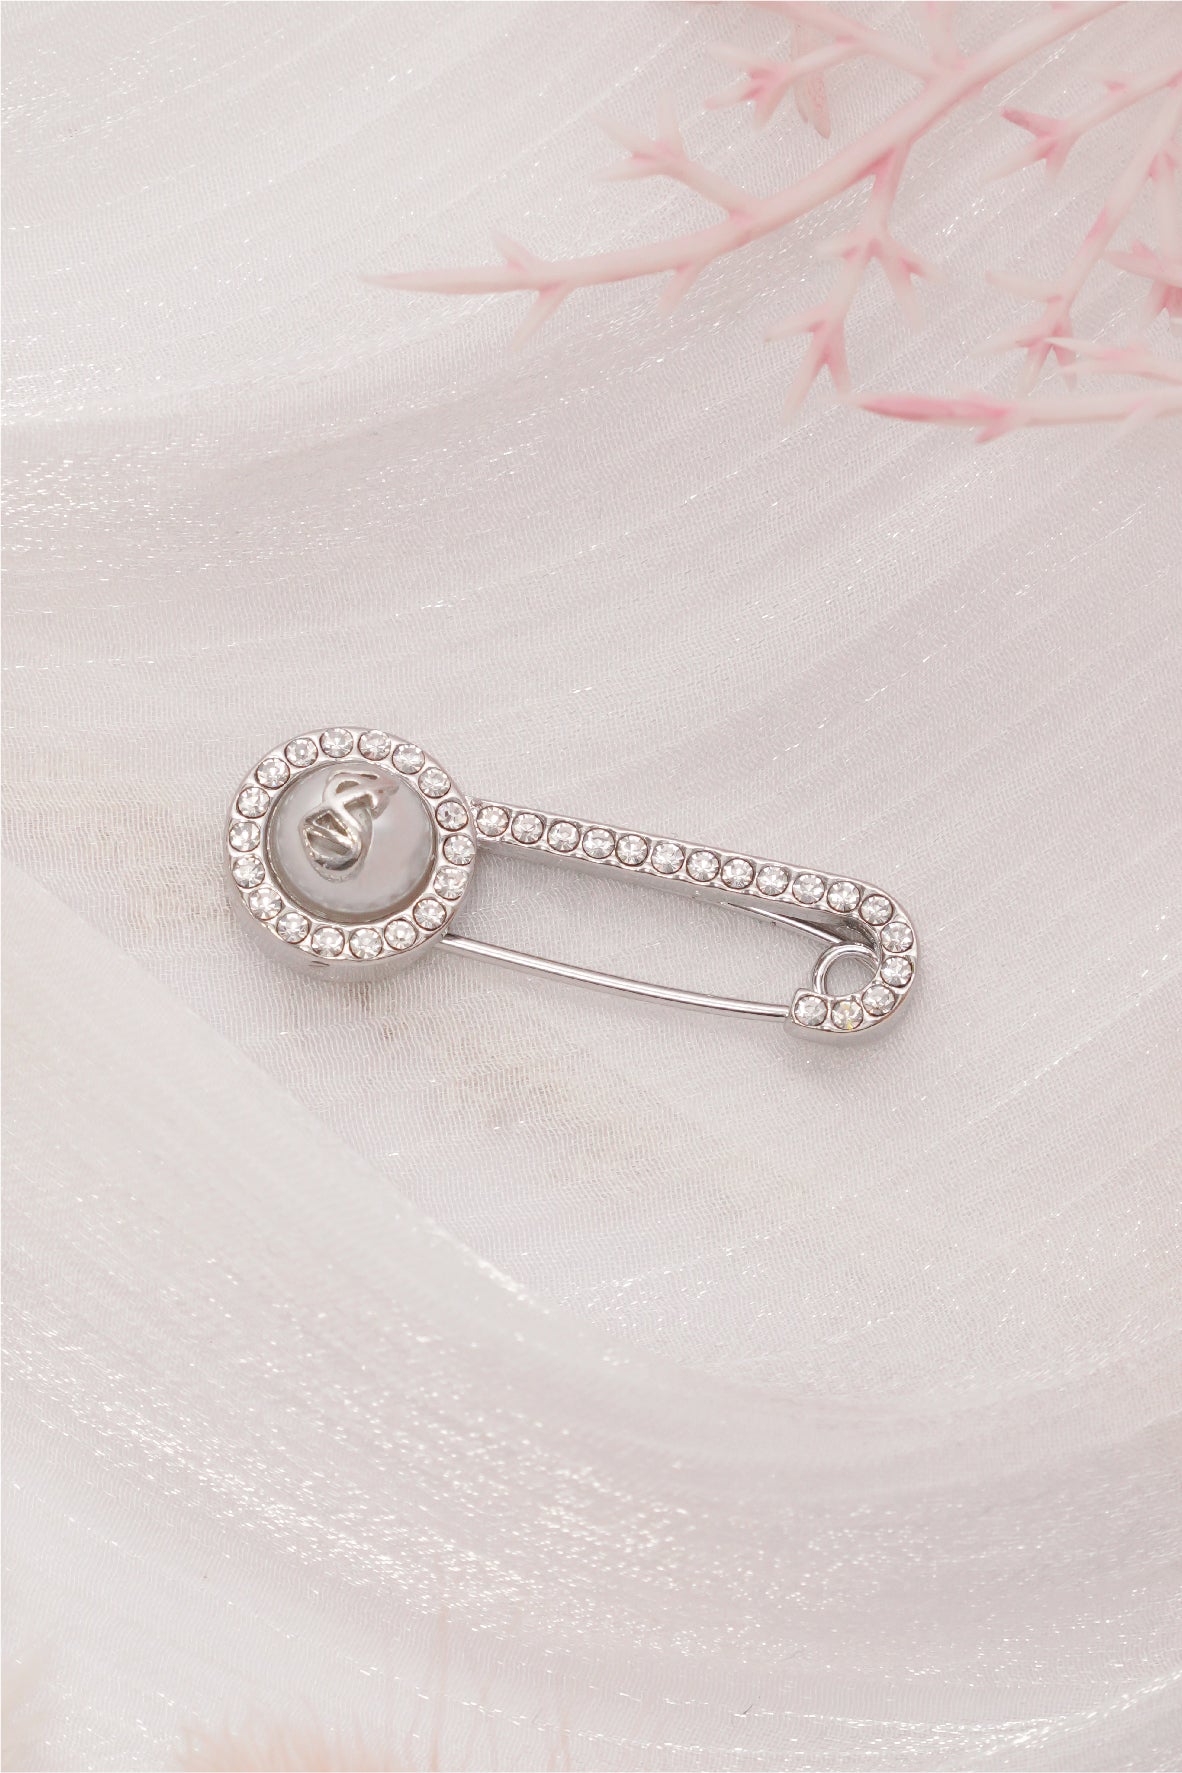 Safety Hijab Pin With Pearl - Silver